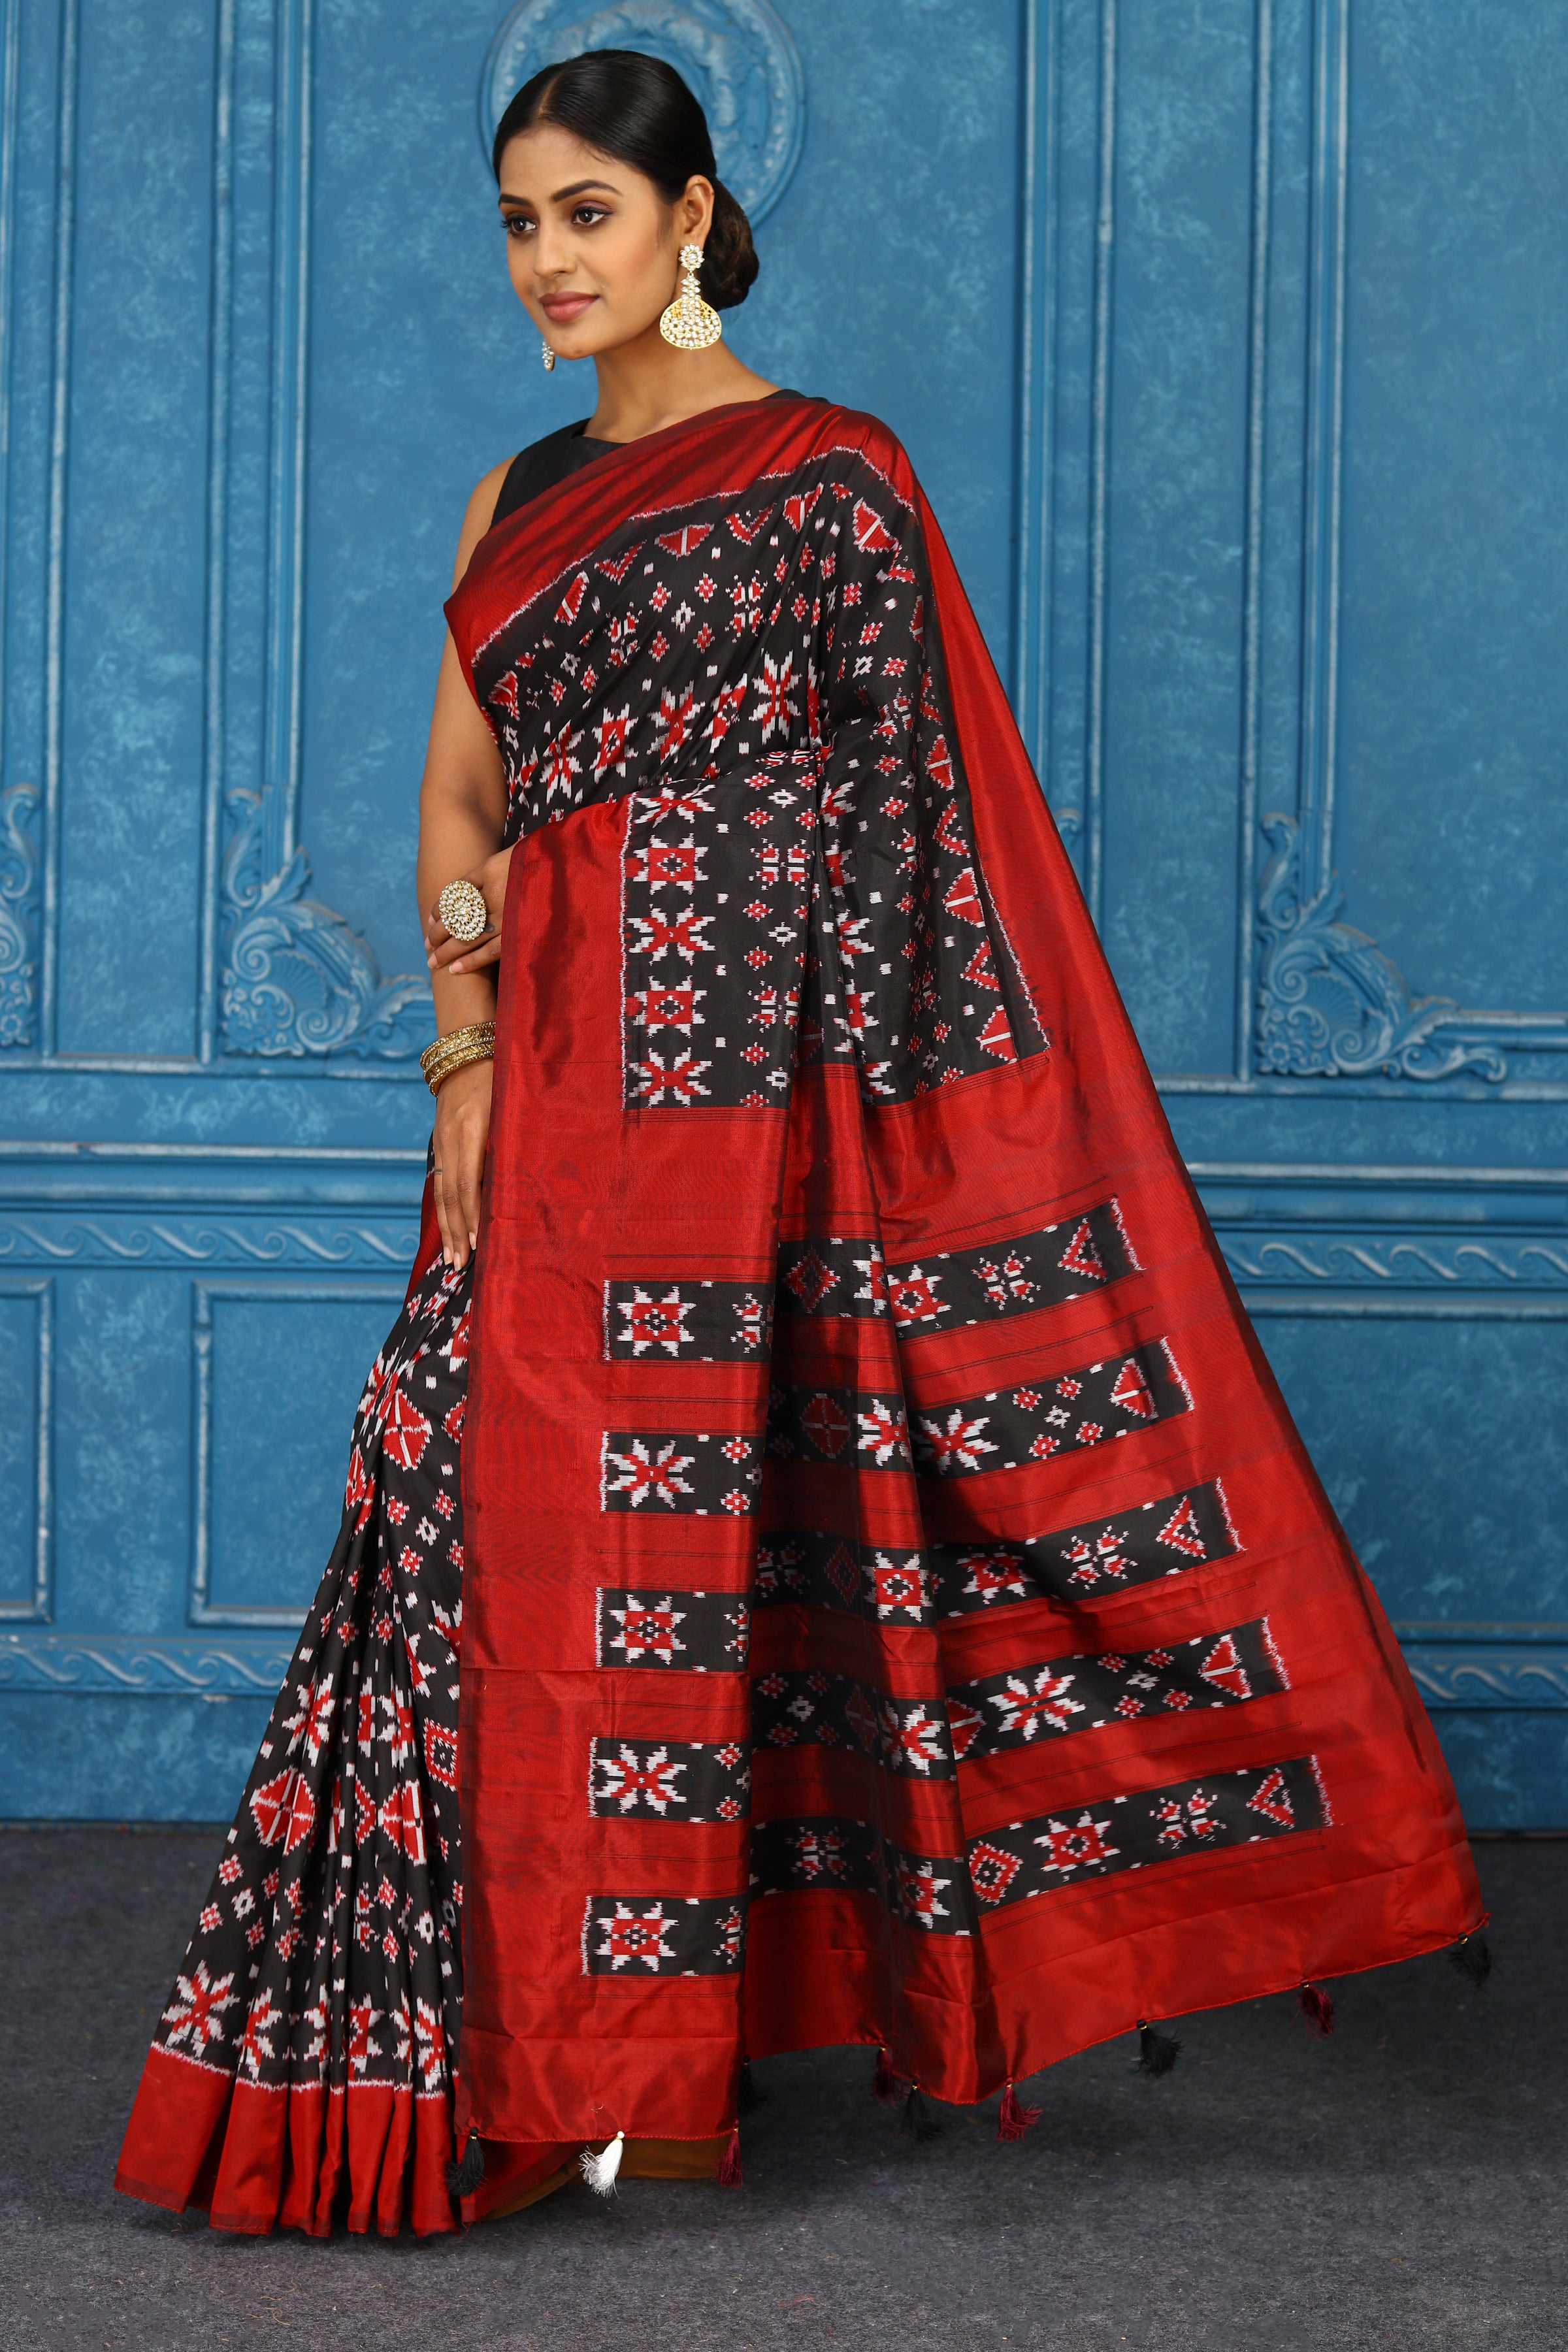 Buy black pochampally silk ikkat sari online in USA with red border. Look your best on festive occasions in latest designer sarees, pure silk sarees, Kanchipuram sarees, handwoven sarees, tussar silk sarees, embroidered sarees from Pure Elegance Indian clothing store in USA.-pallu